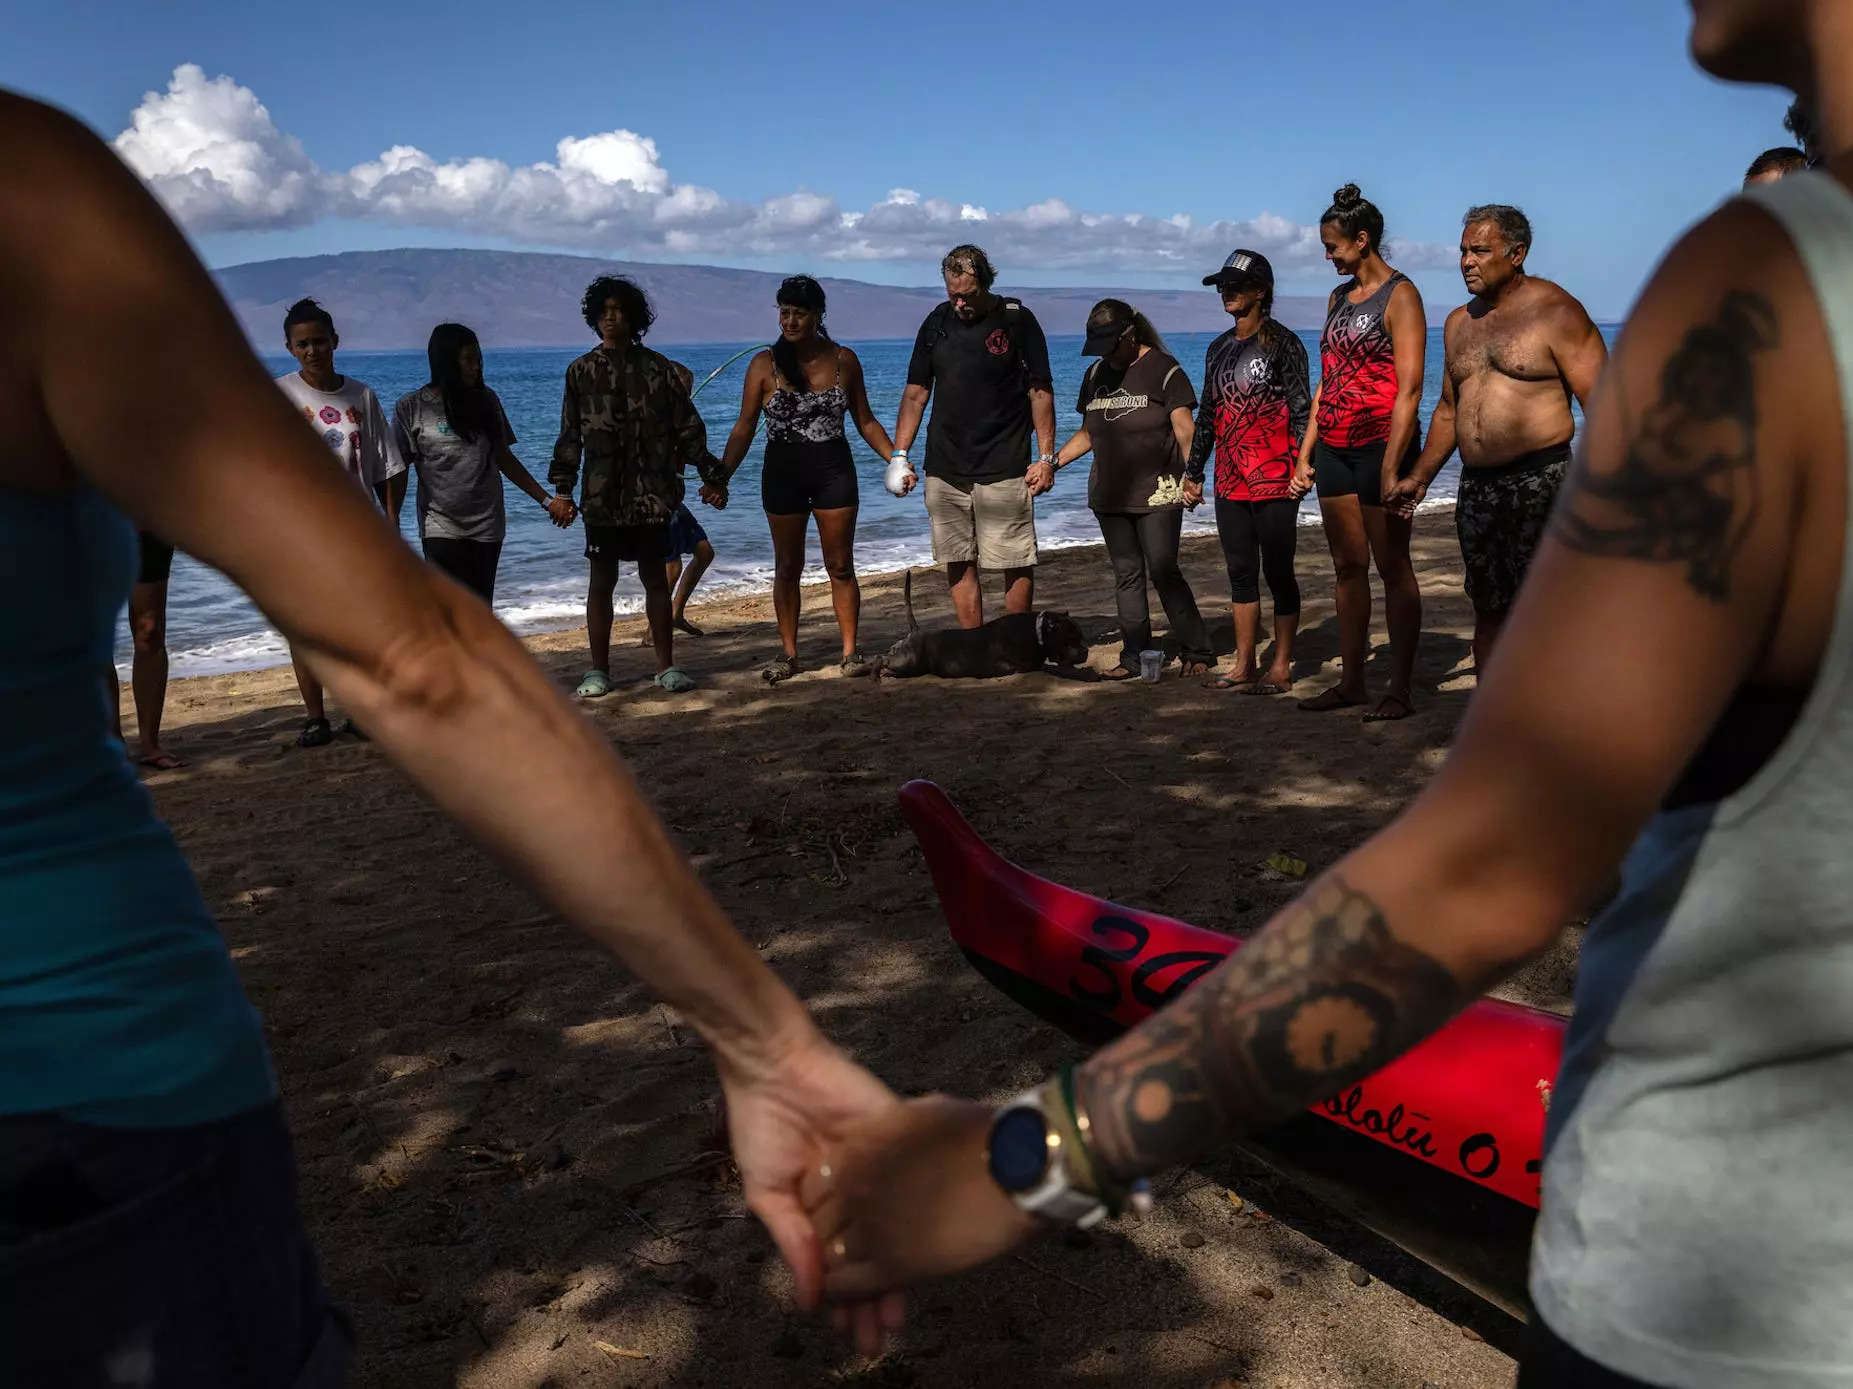 Members of the Lahaina Canoe Club hold hands in prayer in honor of a member who died in the fires. The outing was the first time the club members, many of whom lost their homes, had paddled together since the fires.